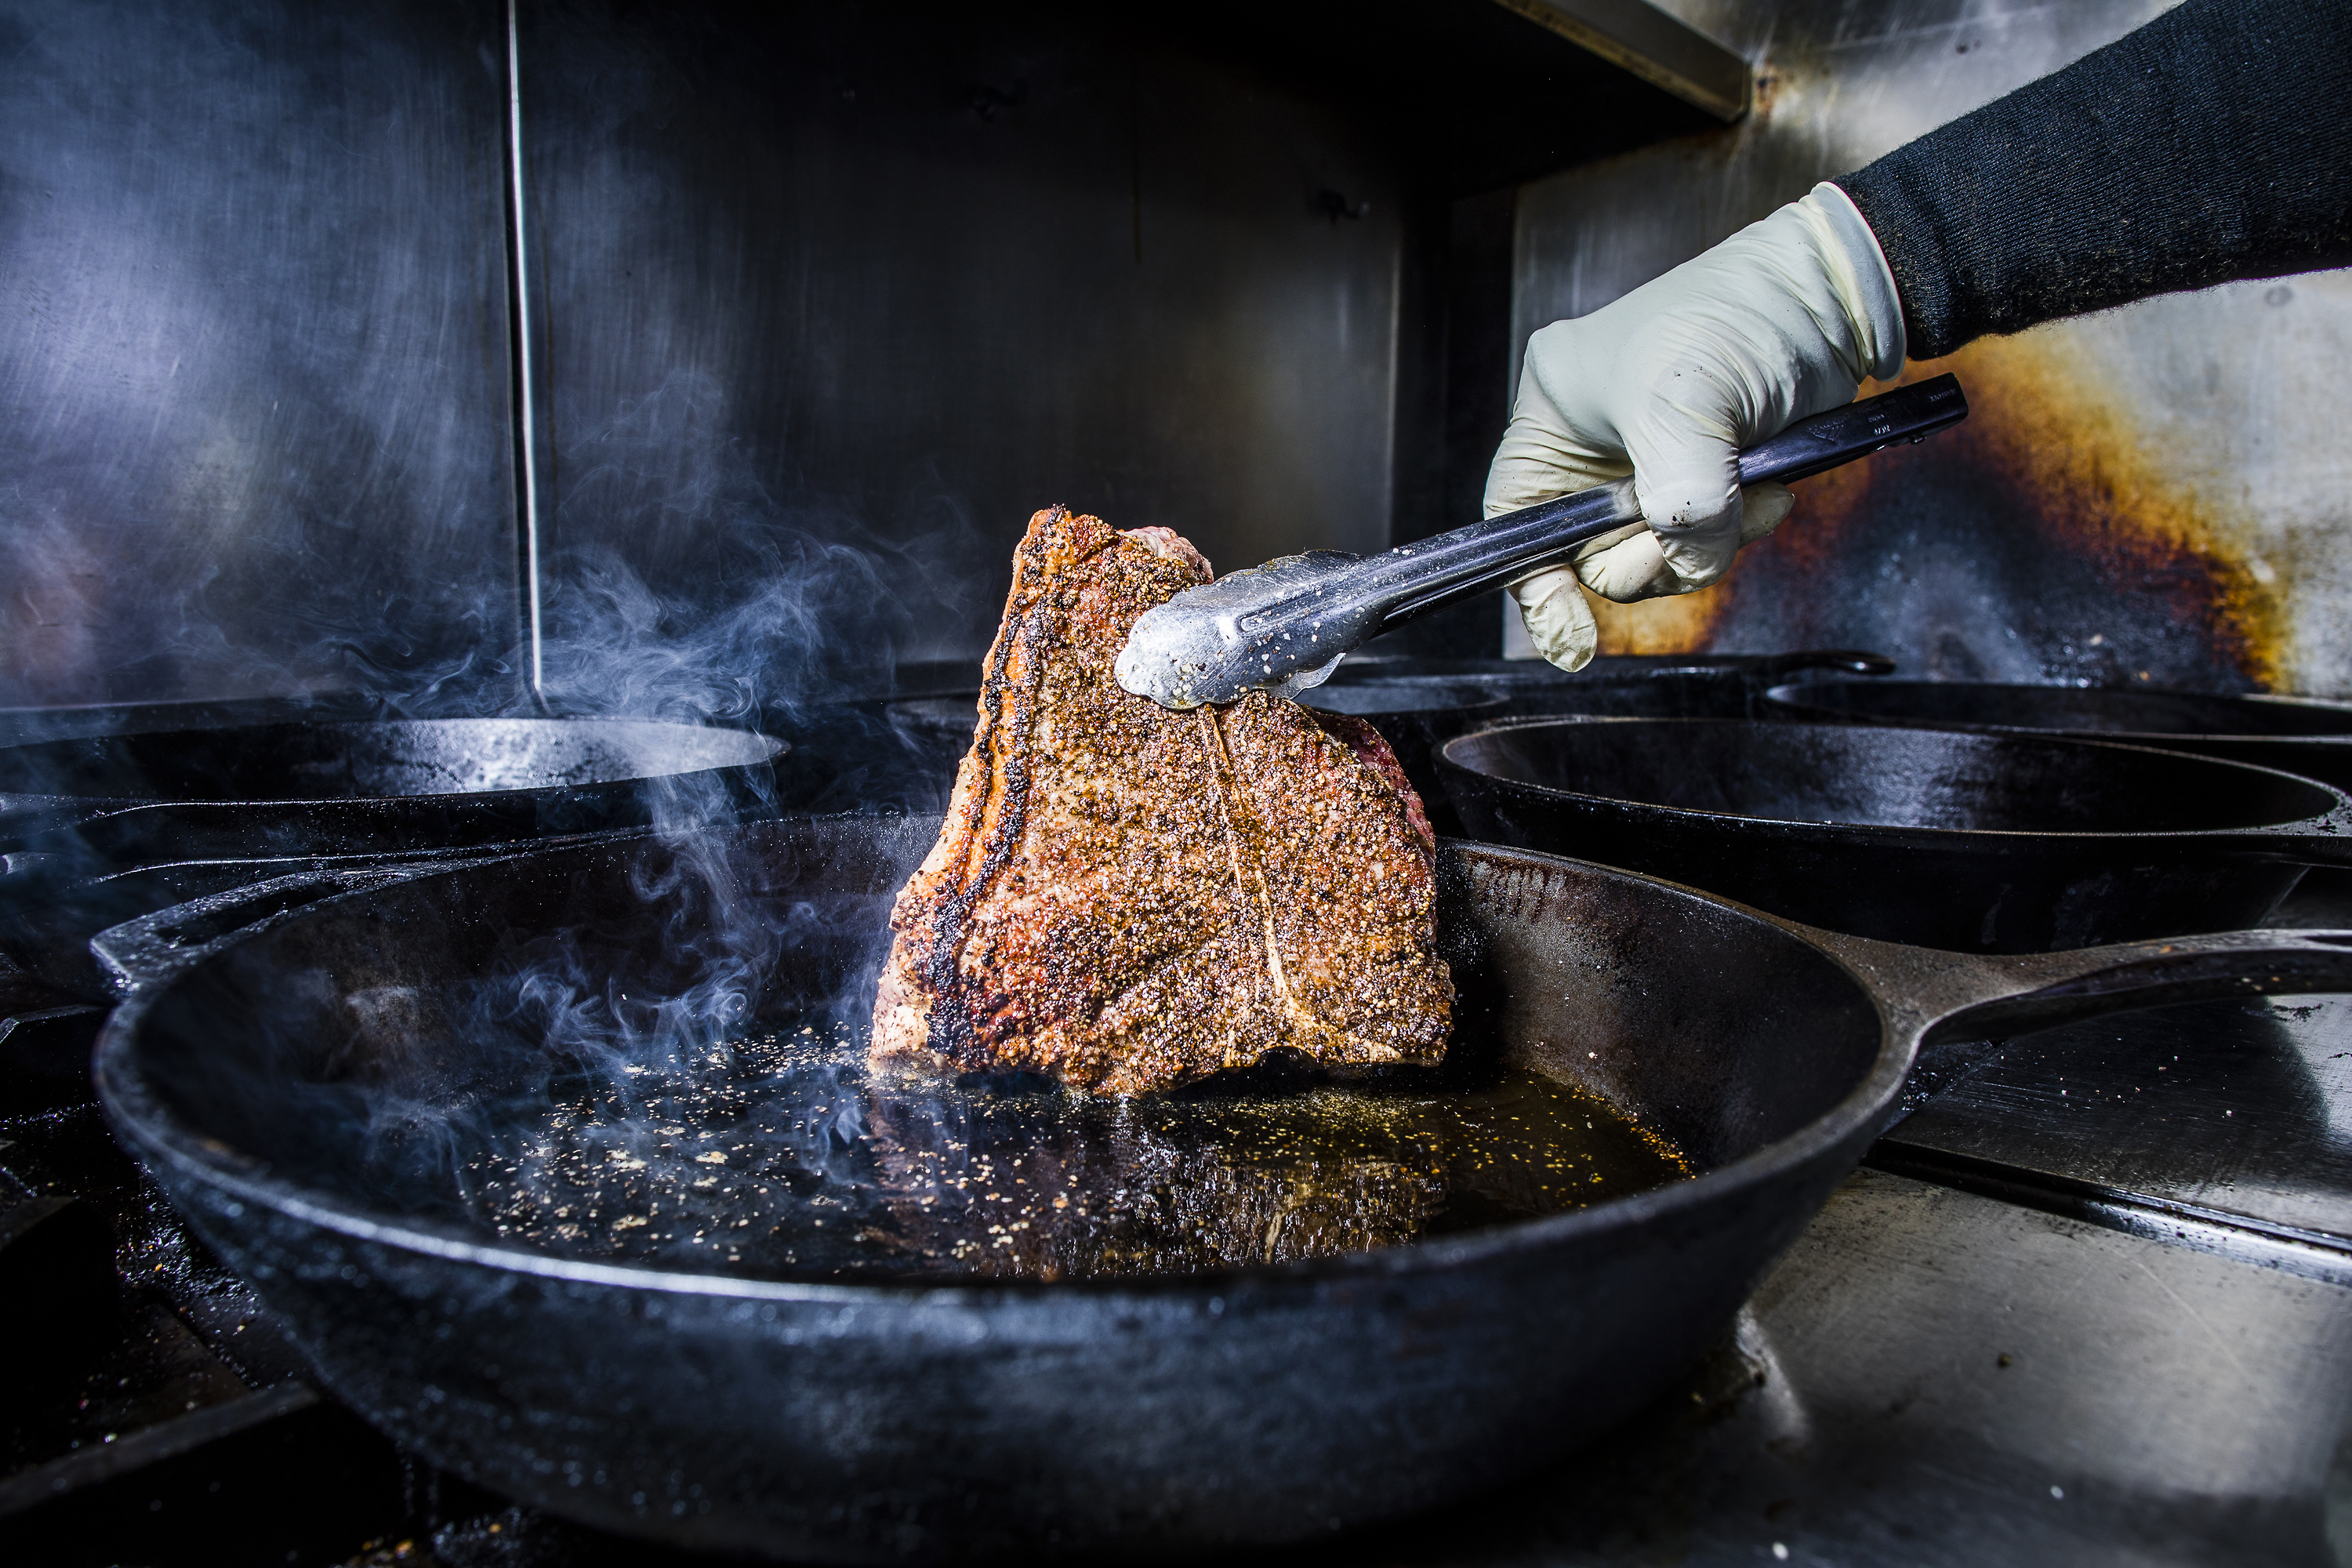 A hand gripping tongs that are holding a steak that is searing over a heated cast iron pan.